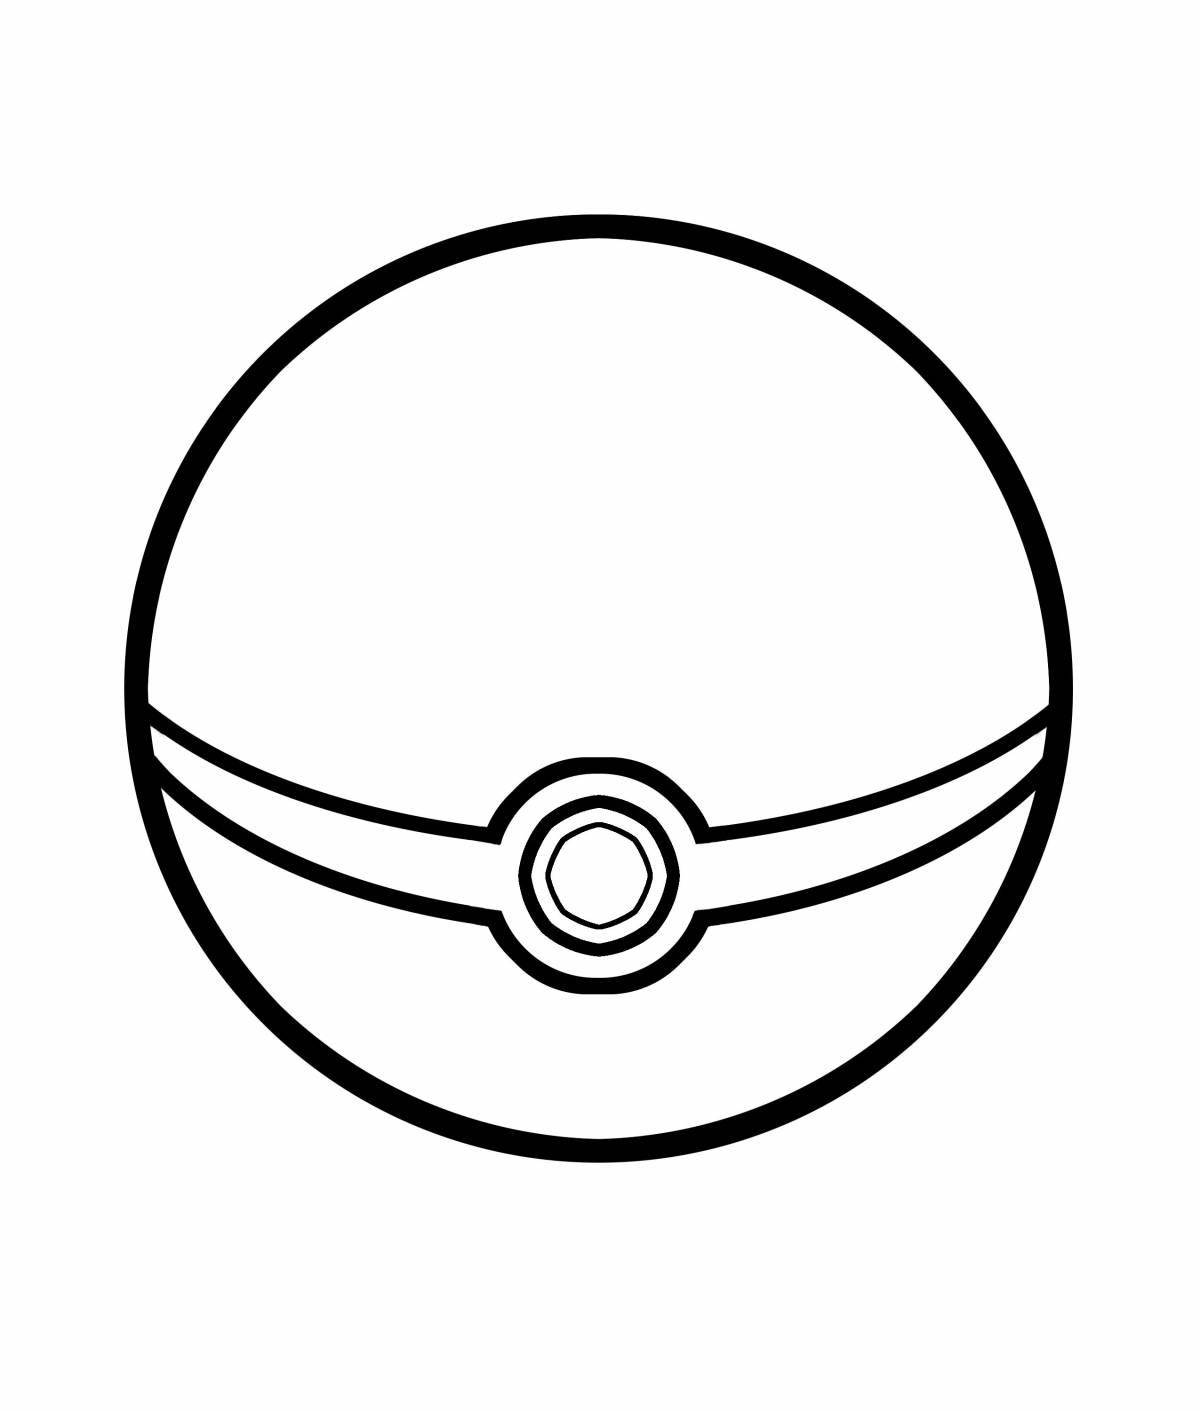 Colorful pokeball coloring page